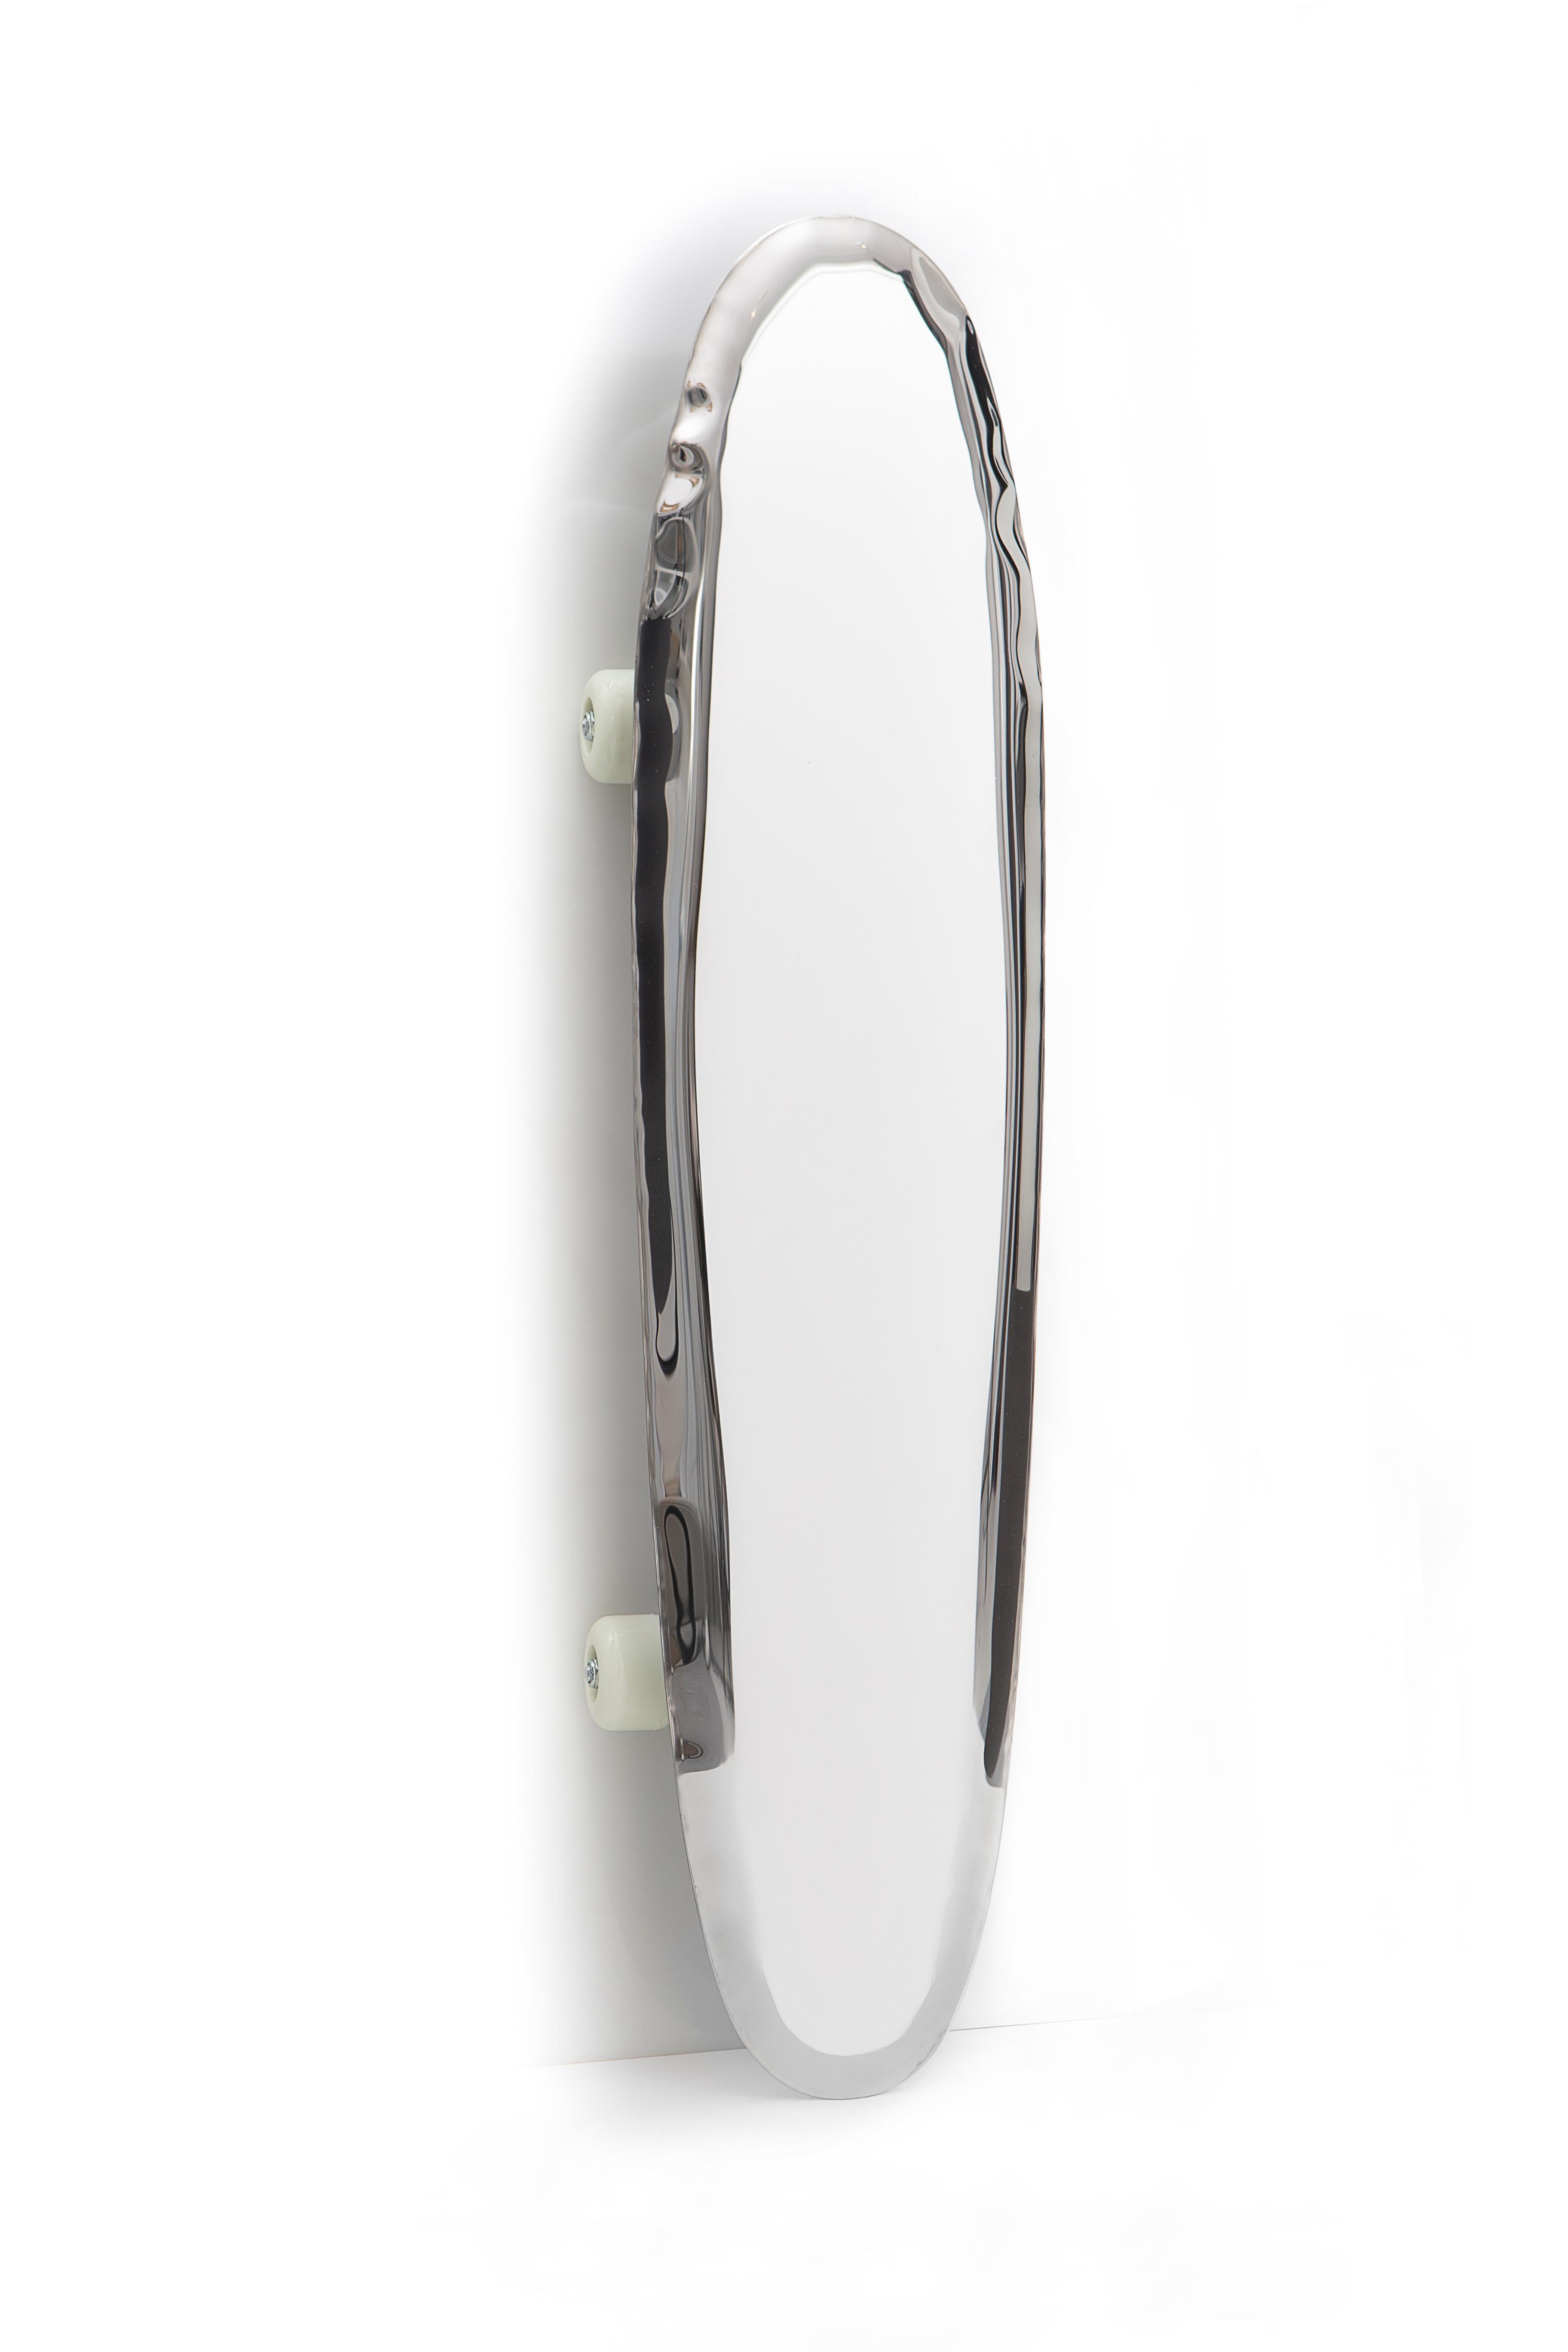 Stainless Steel Bolid wall sculpture by Zieta
Dimensions: W 20 x H 80 cm 
Material: Stainless Steel. 
Finish: Polished. 
Available also in Emerald finish.


BOLID, a streamlined object, inspired by the shape of a longboard and by the brightness of